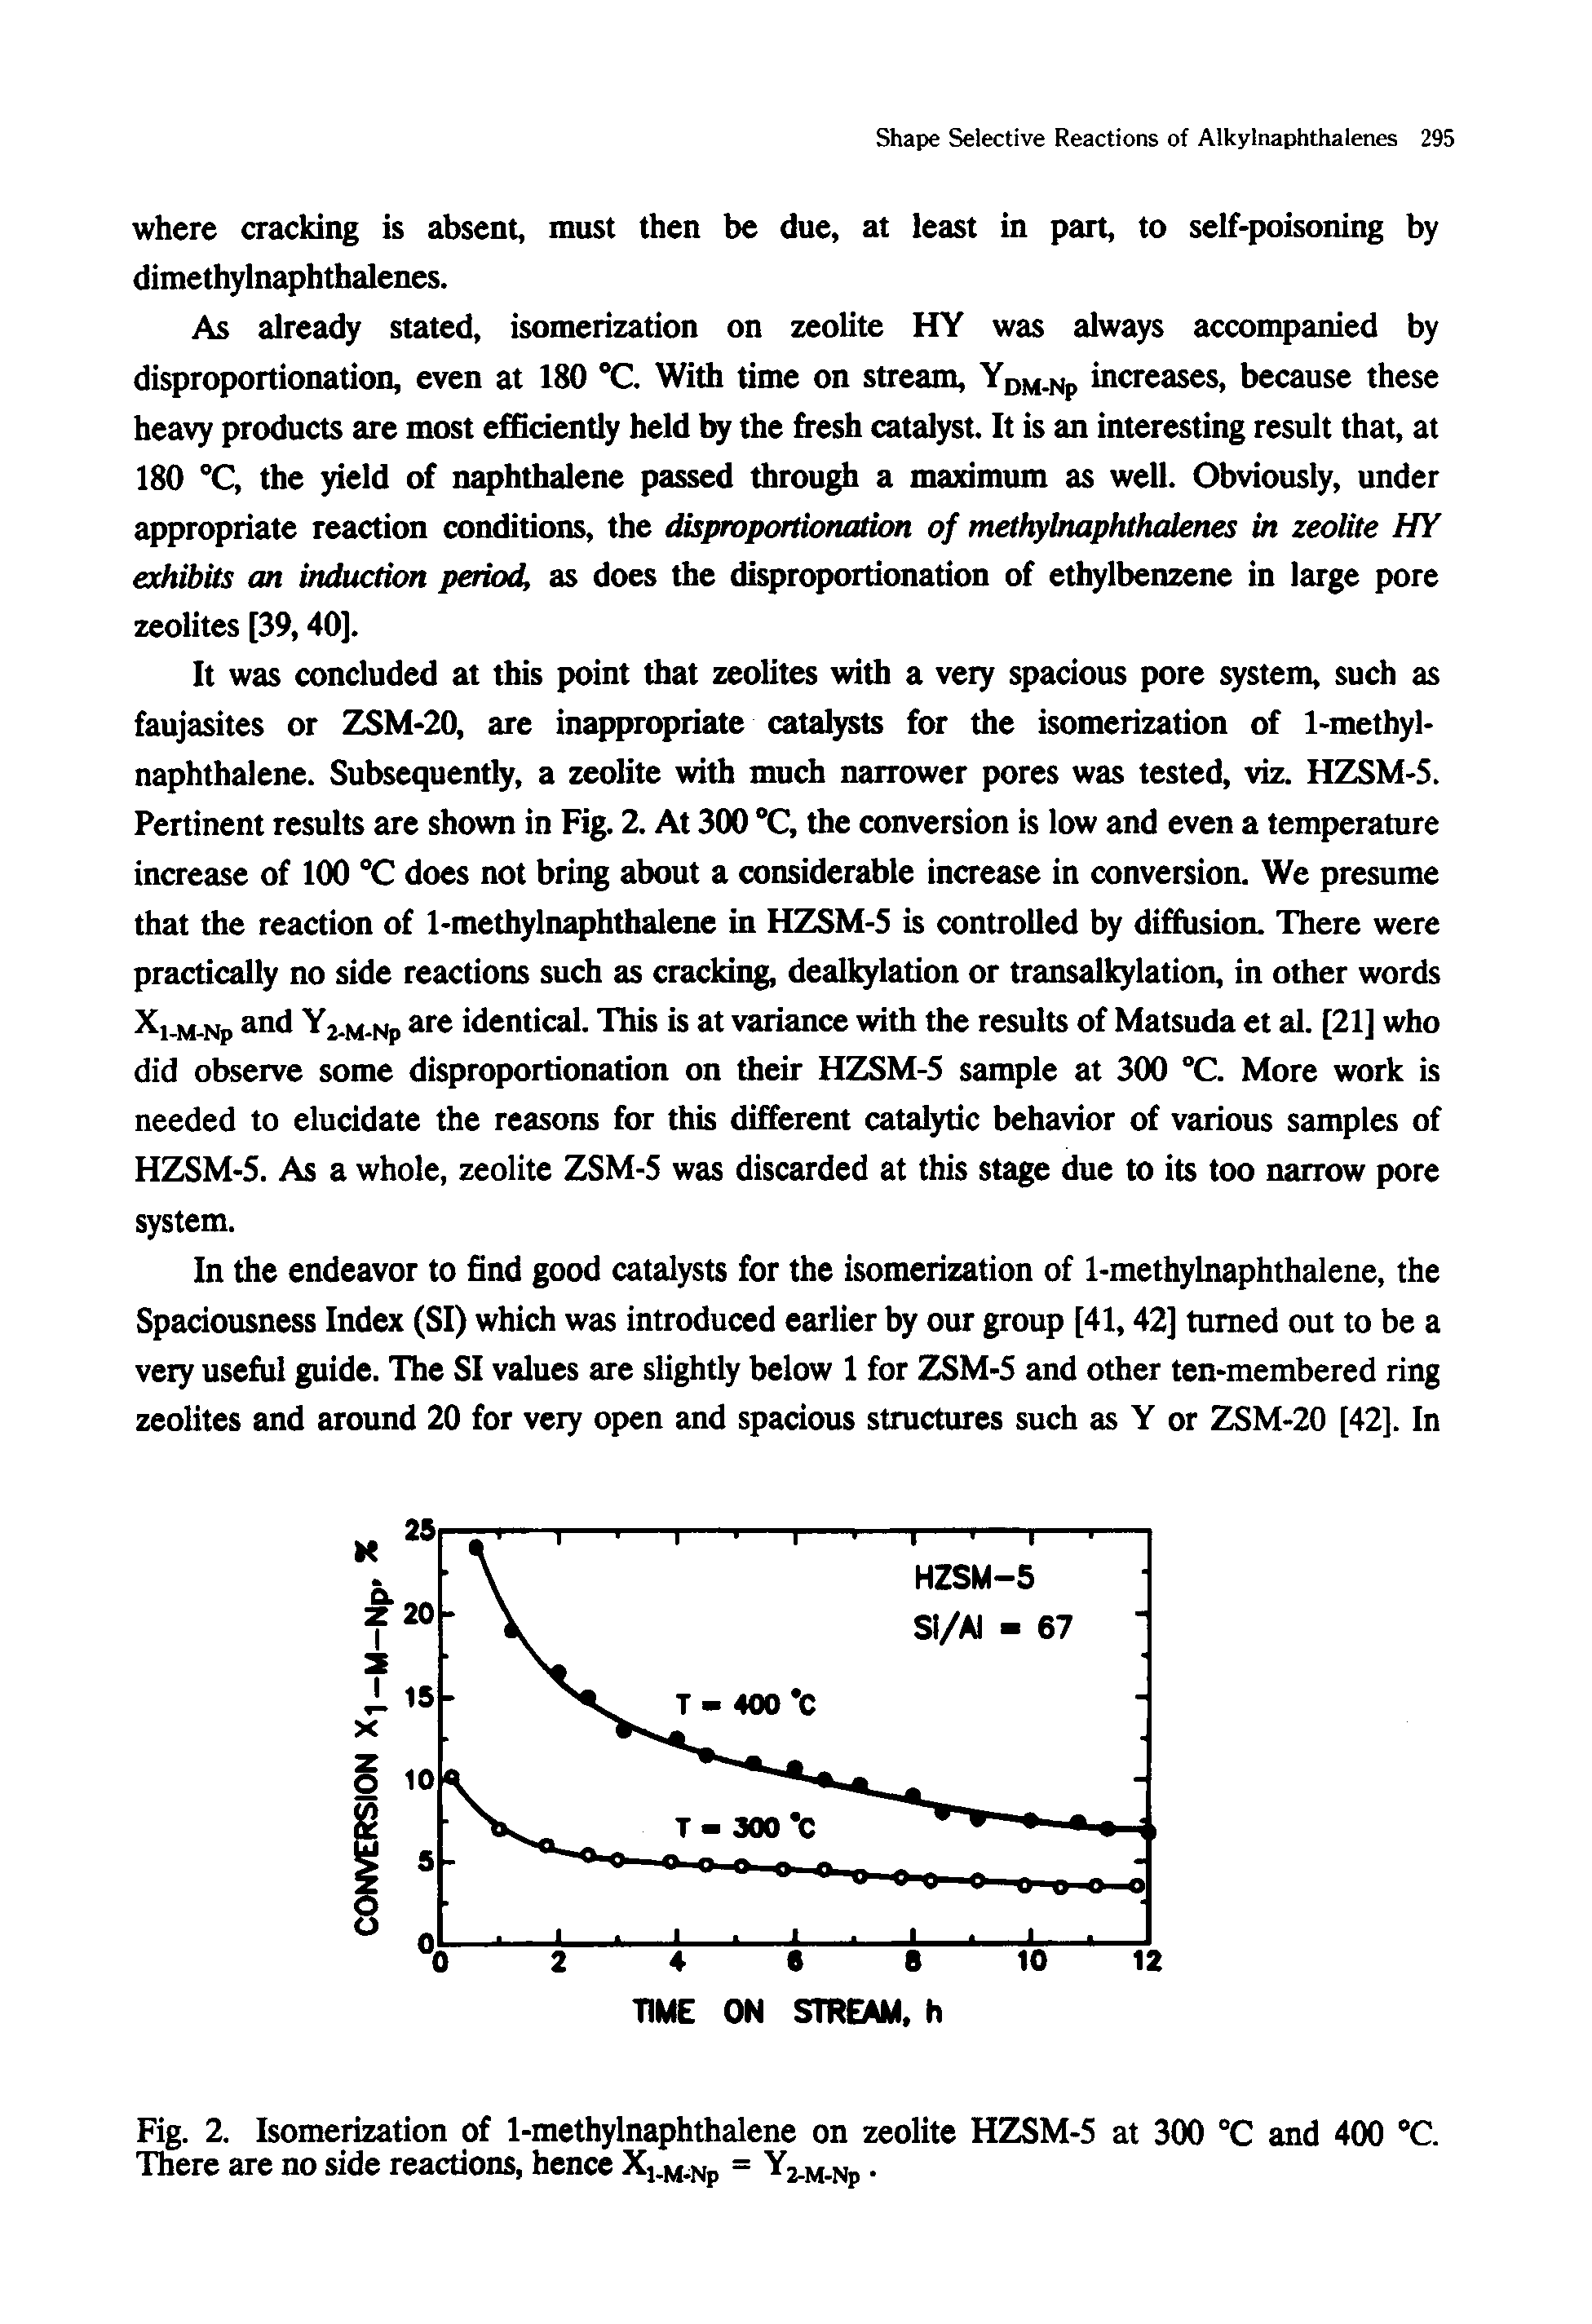 Fig. 2. Isomerization of 1-methylnaphthalene on zeolite HZSM-5 at 300 °C and 400 C. There are no side reactions, hence Xi.m.np = Y2.M.NP ...